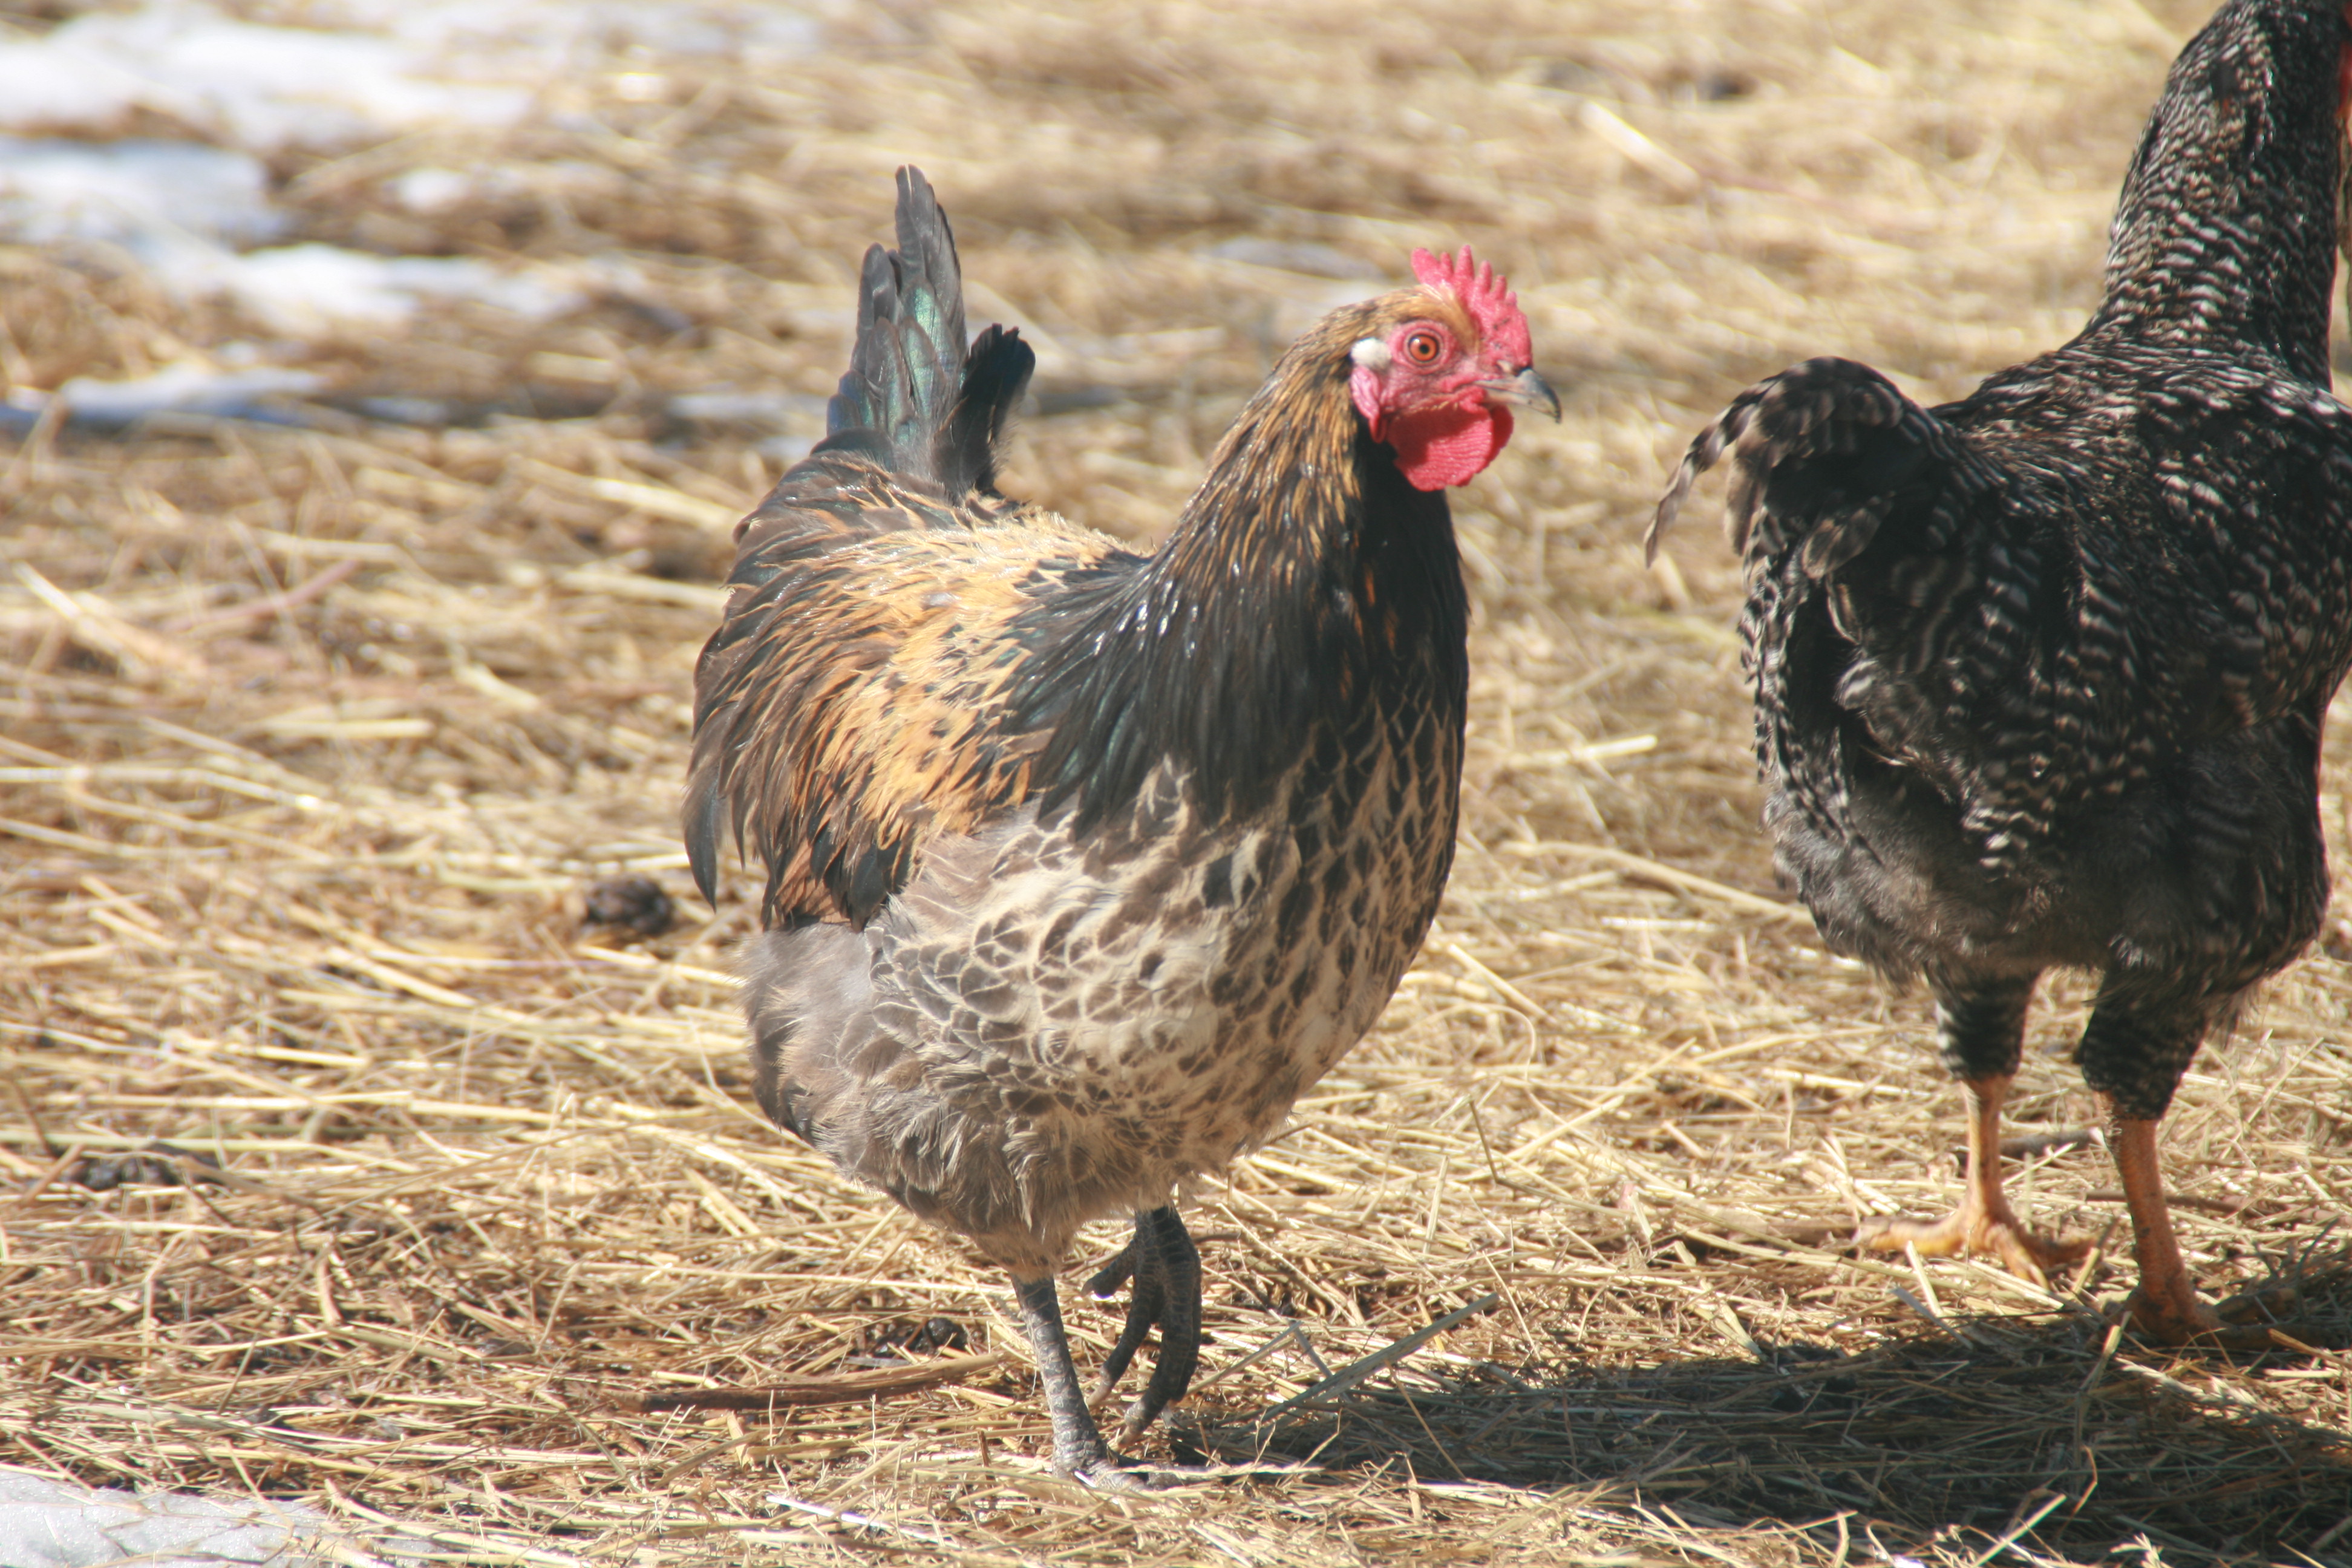 Foreground: Selah, young rooster. Background, young Dominique cross rooster